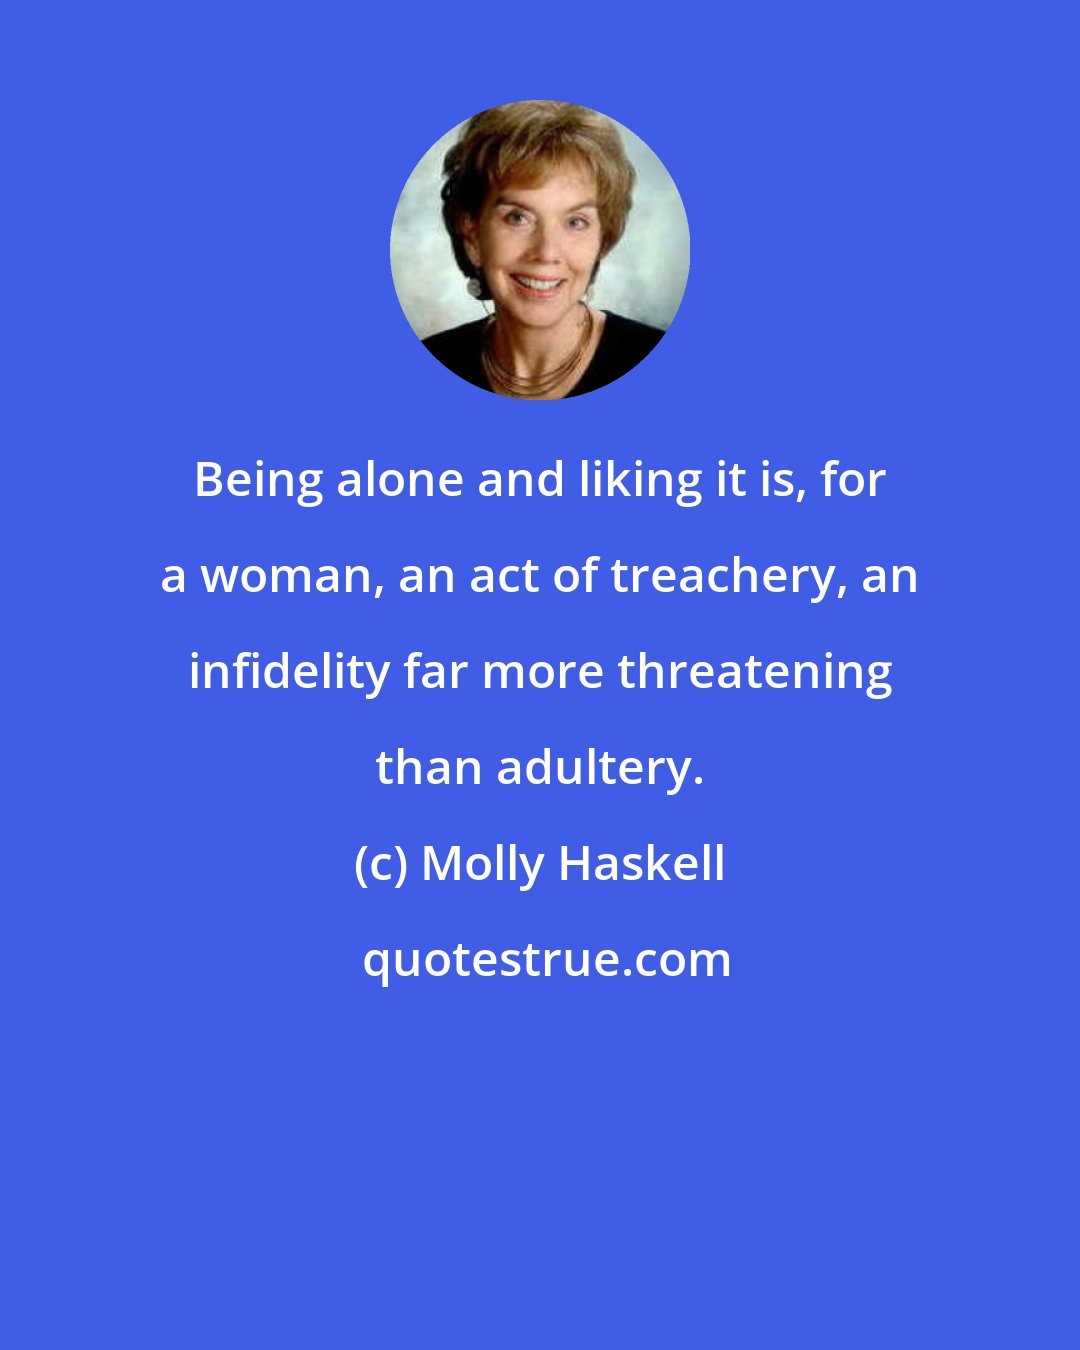 Molly Haskell: Being alone and liking it is, for a woman, an act of treachery, an infidelity far more threatening than adultery.